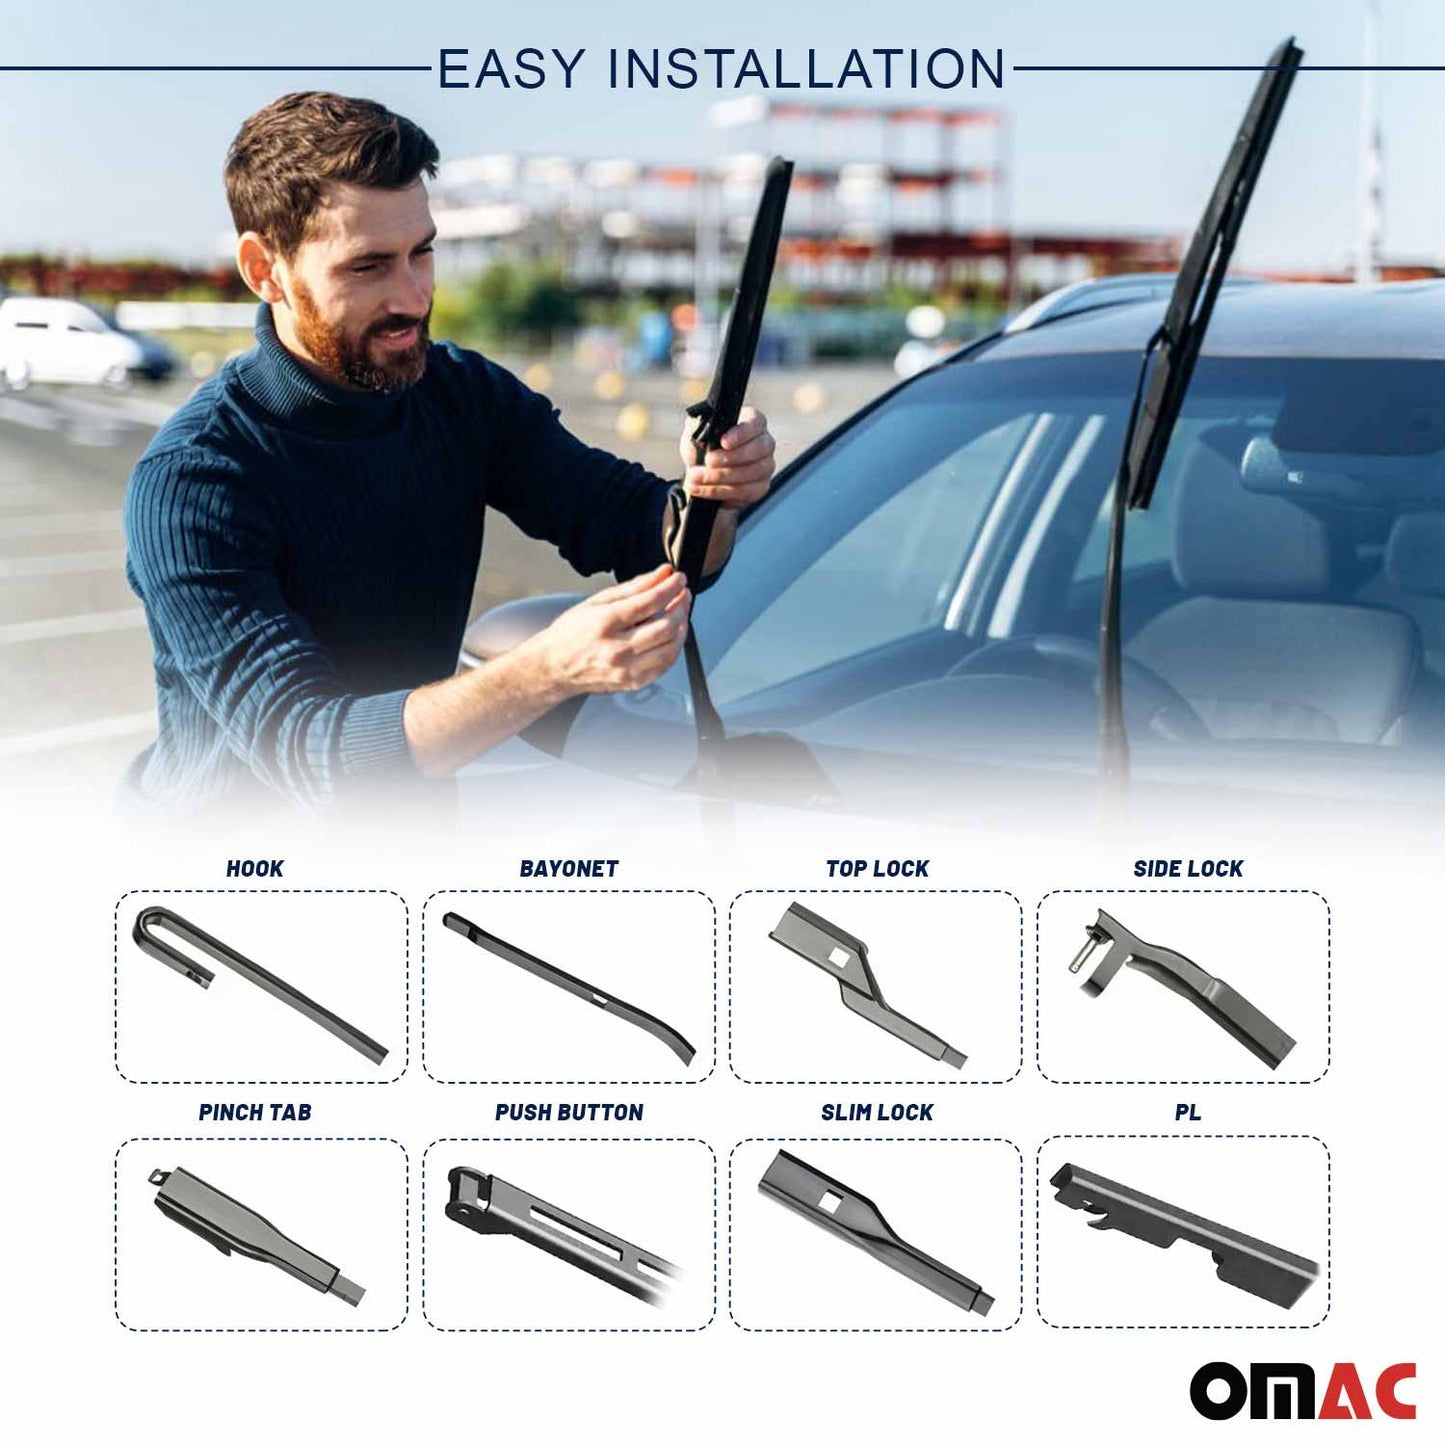 OMAC Front & Rear Windshield Wiper Blades Set for Mazda 5 2006-2018 A050605